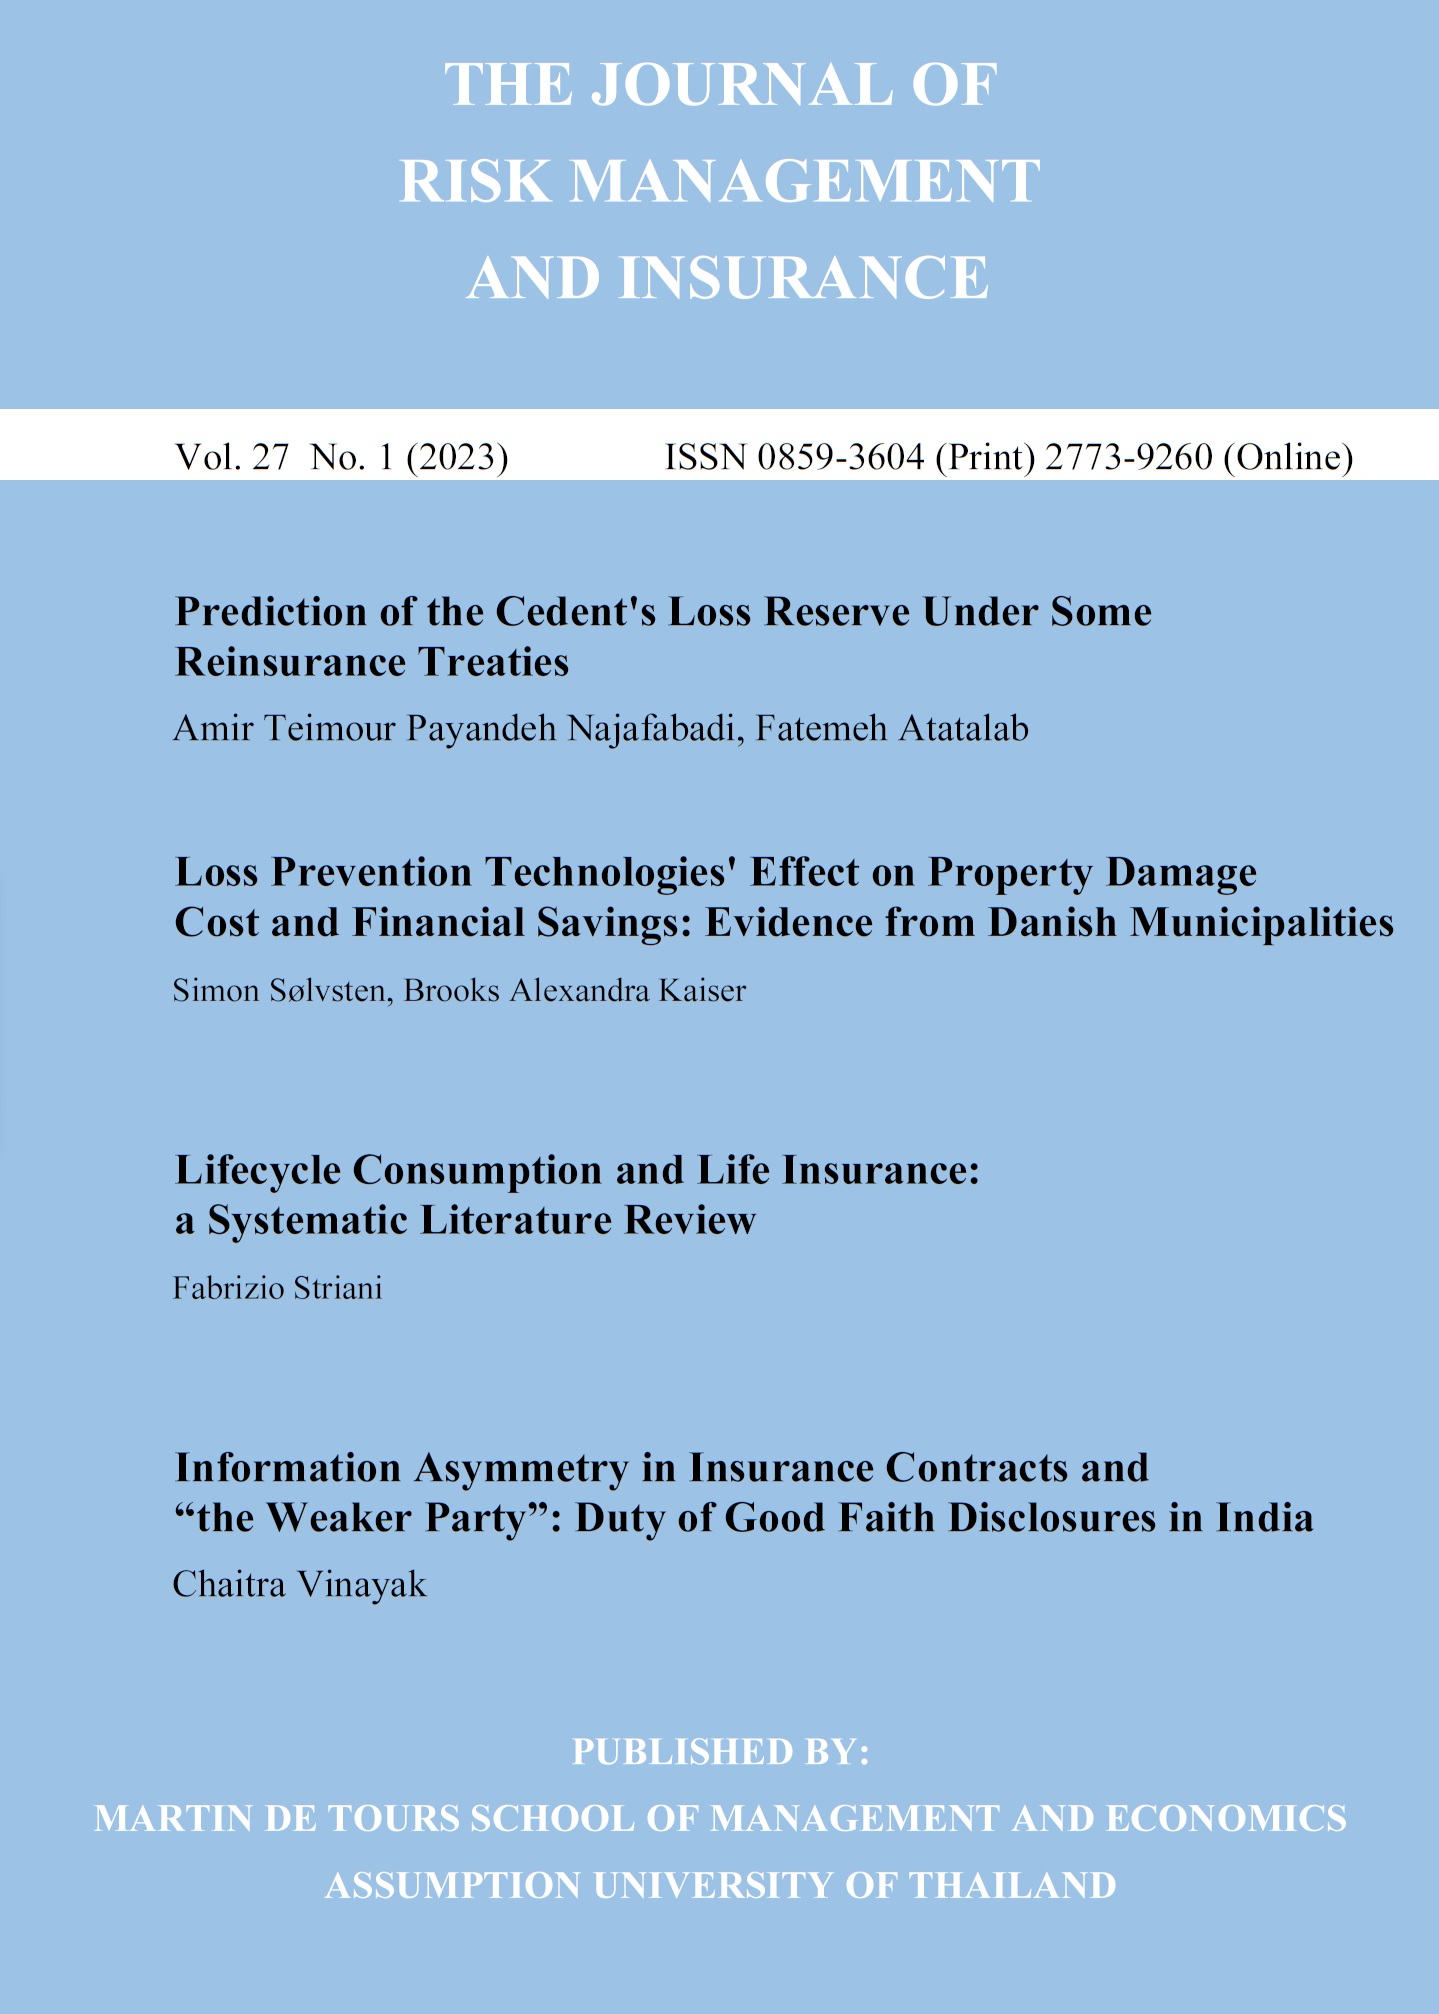 					View Vol. 27 No. 1 (2023): The Journal of Risk Management and Insurance
				